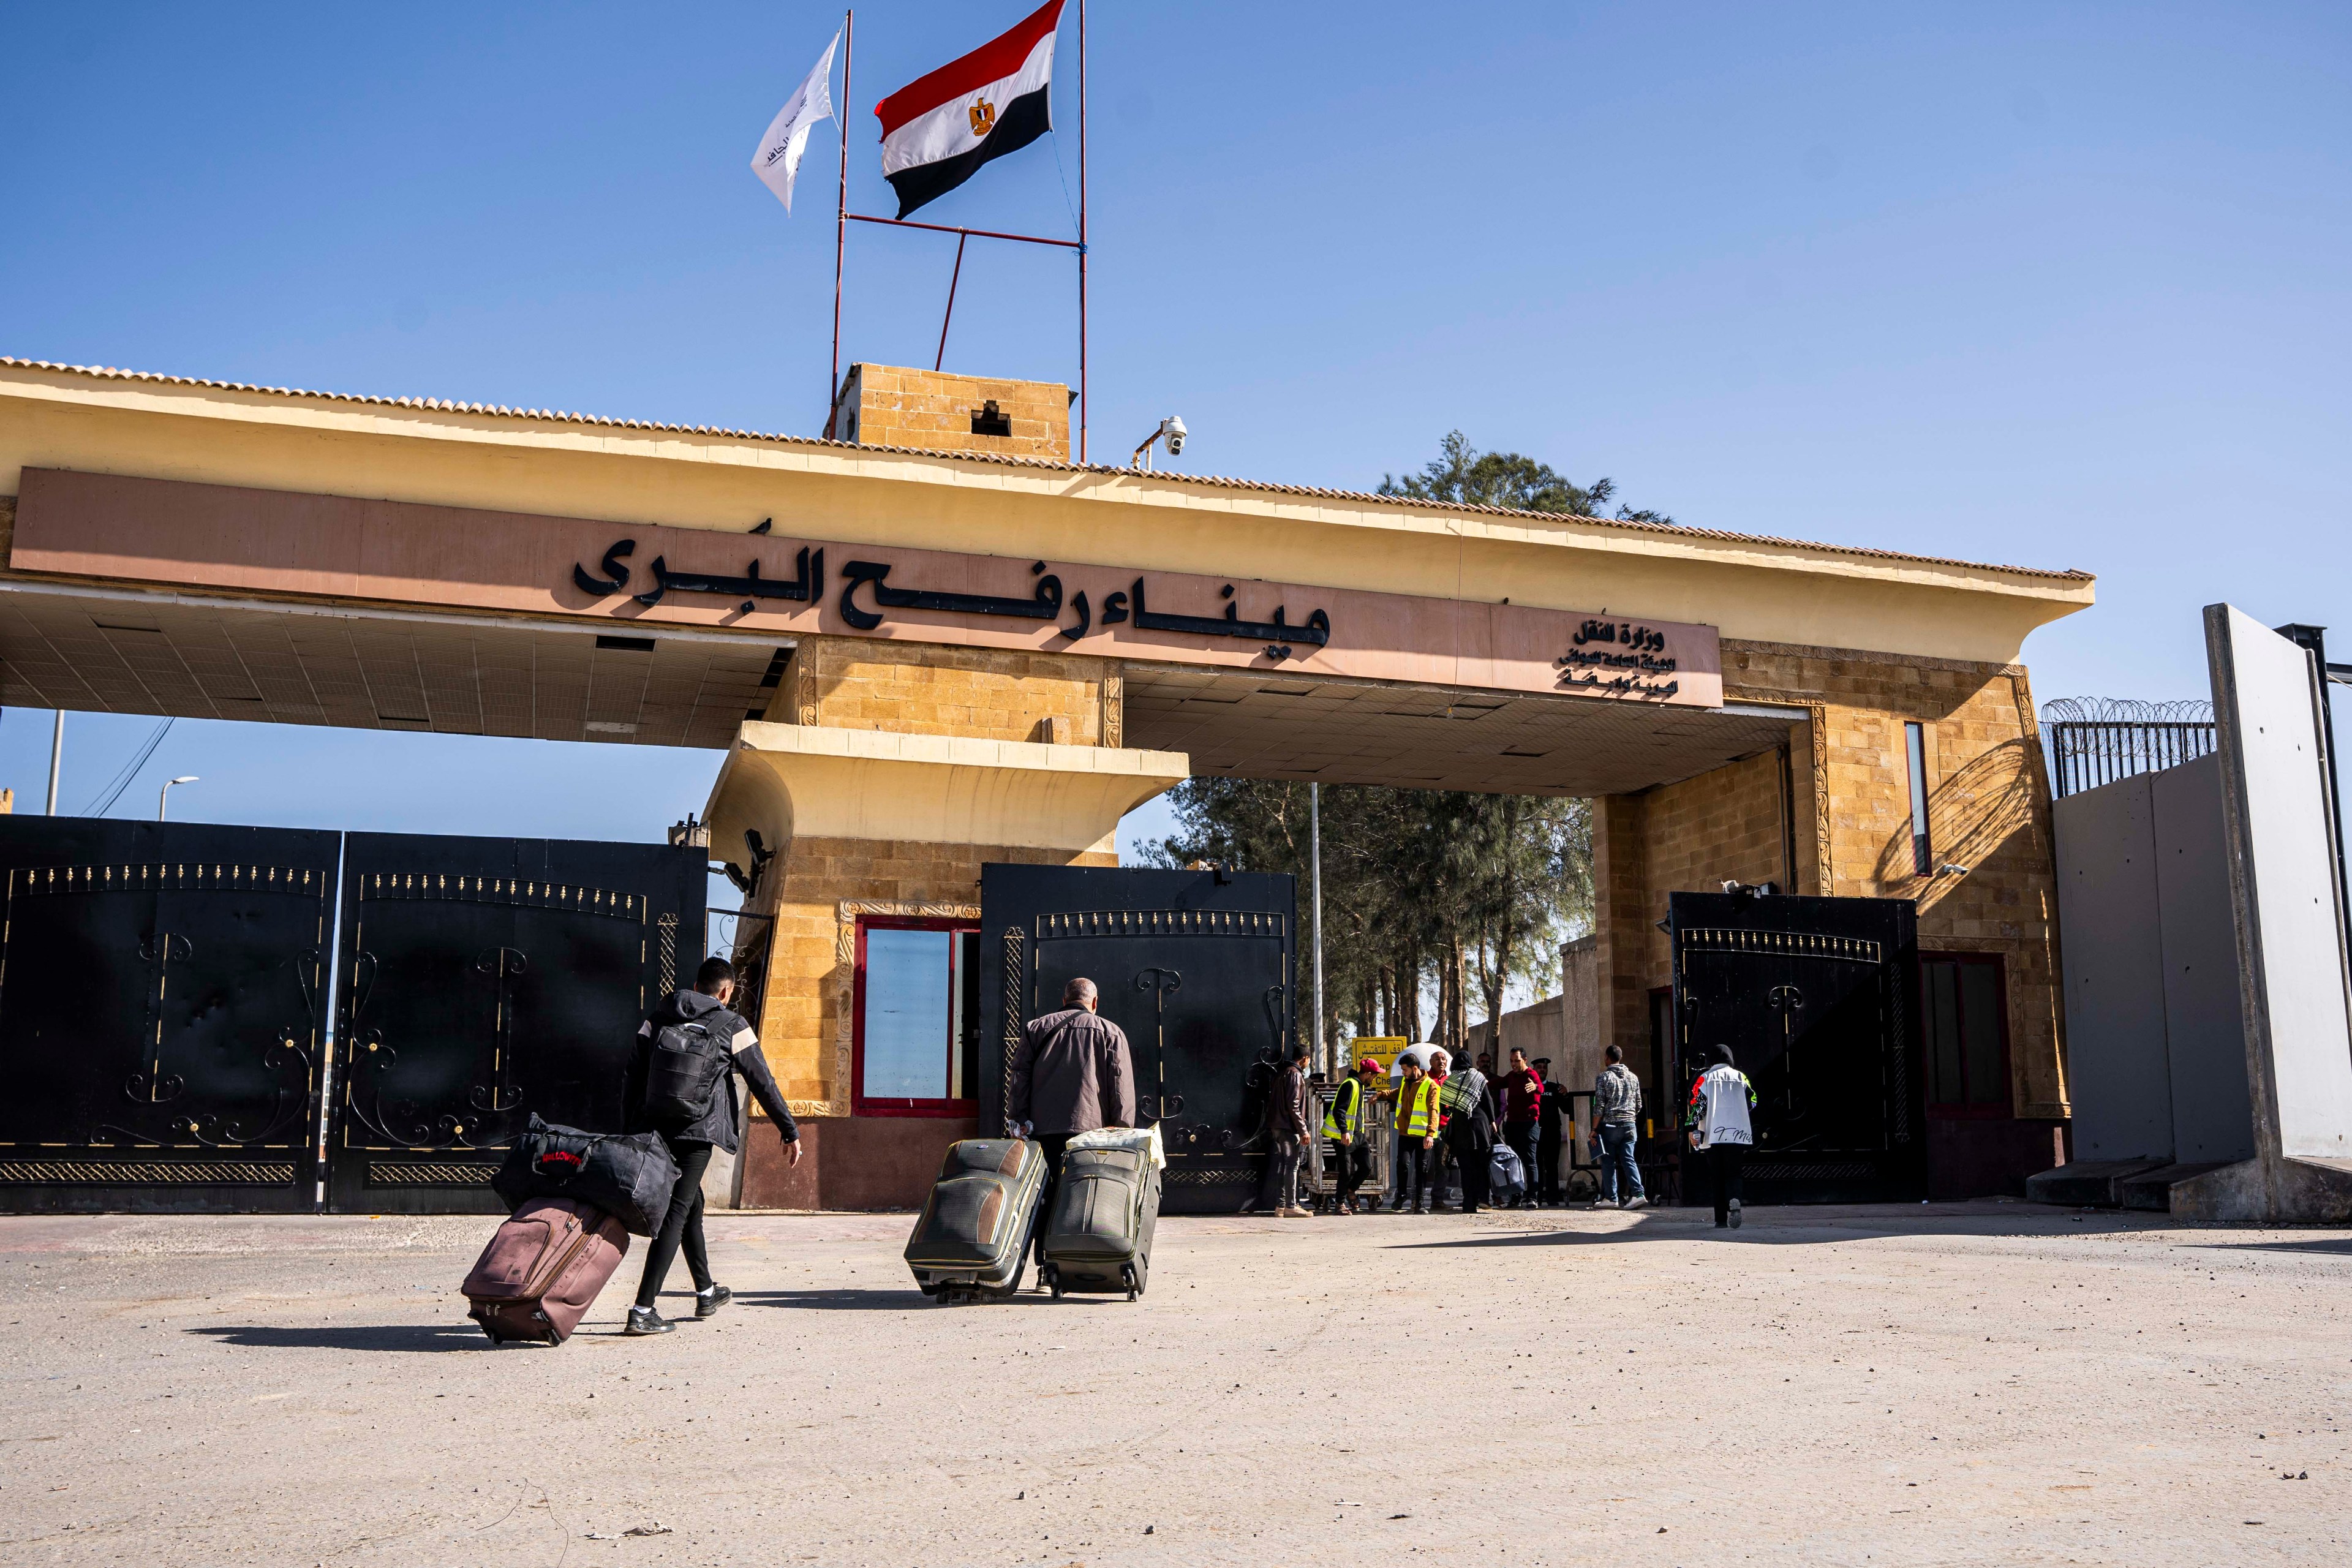 Travelers with luggage walk towards a gate beneath a building with flags and Arab script signage.